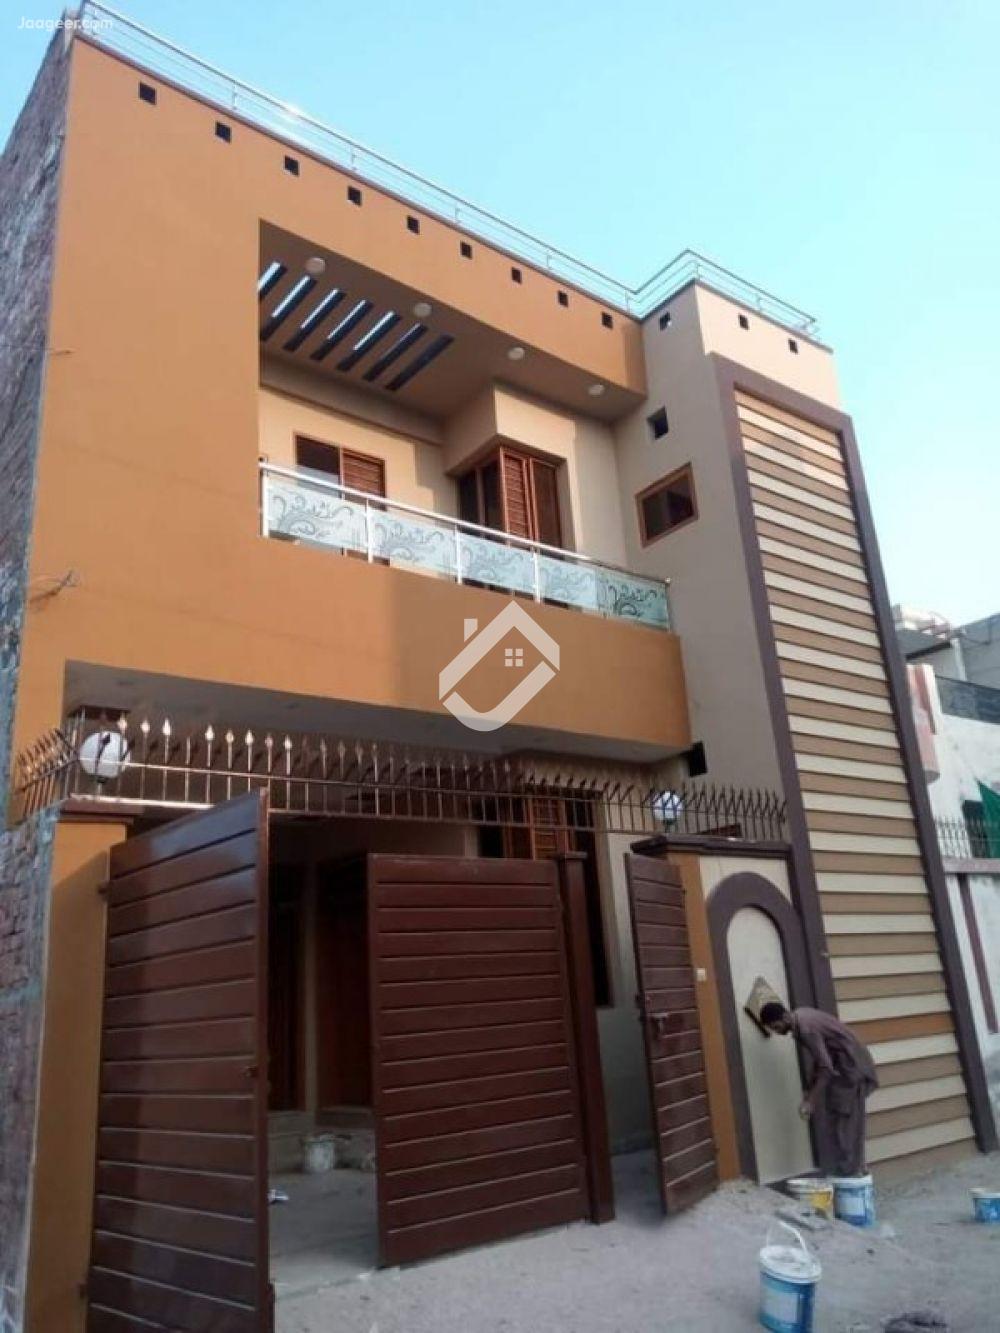 View  5 Marla Double Storey House For Sale In Ghagra Villas Society in Ghagra Villas Society, Multan